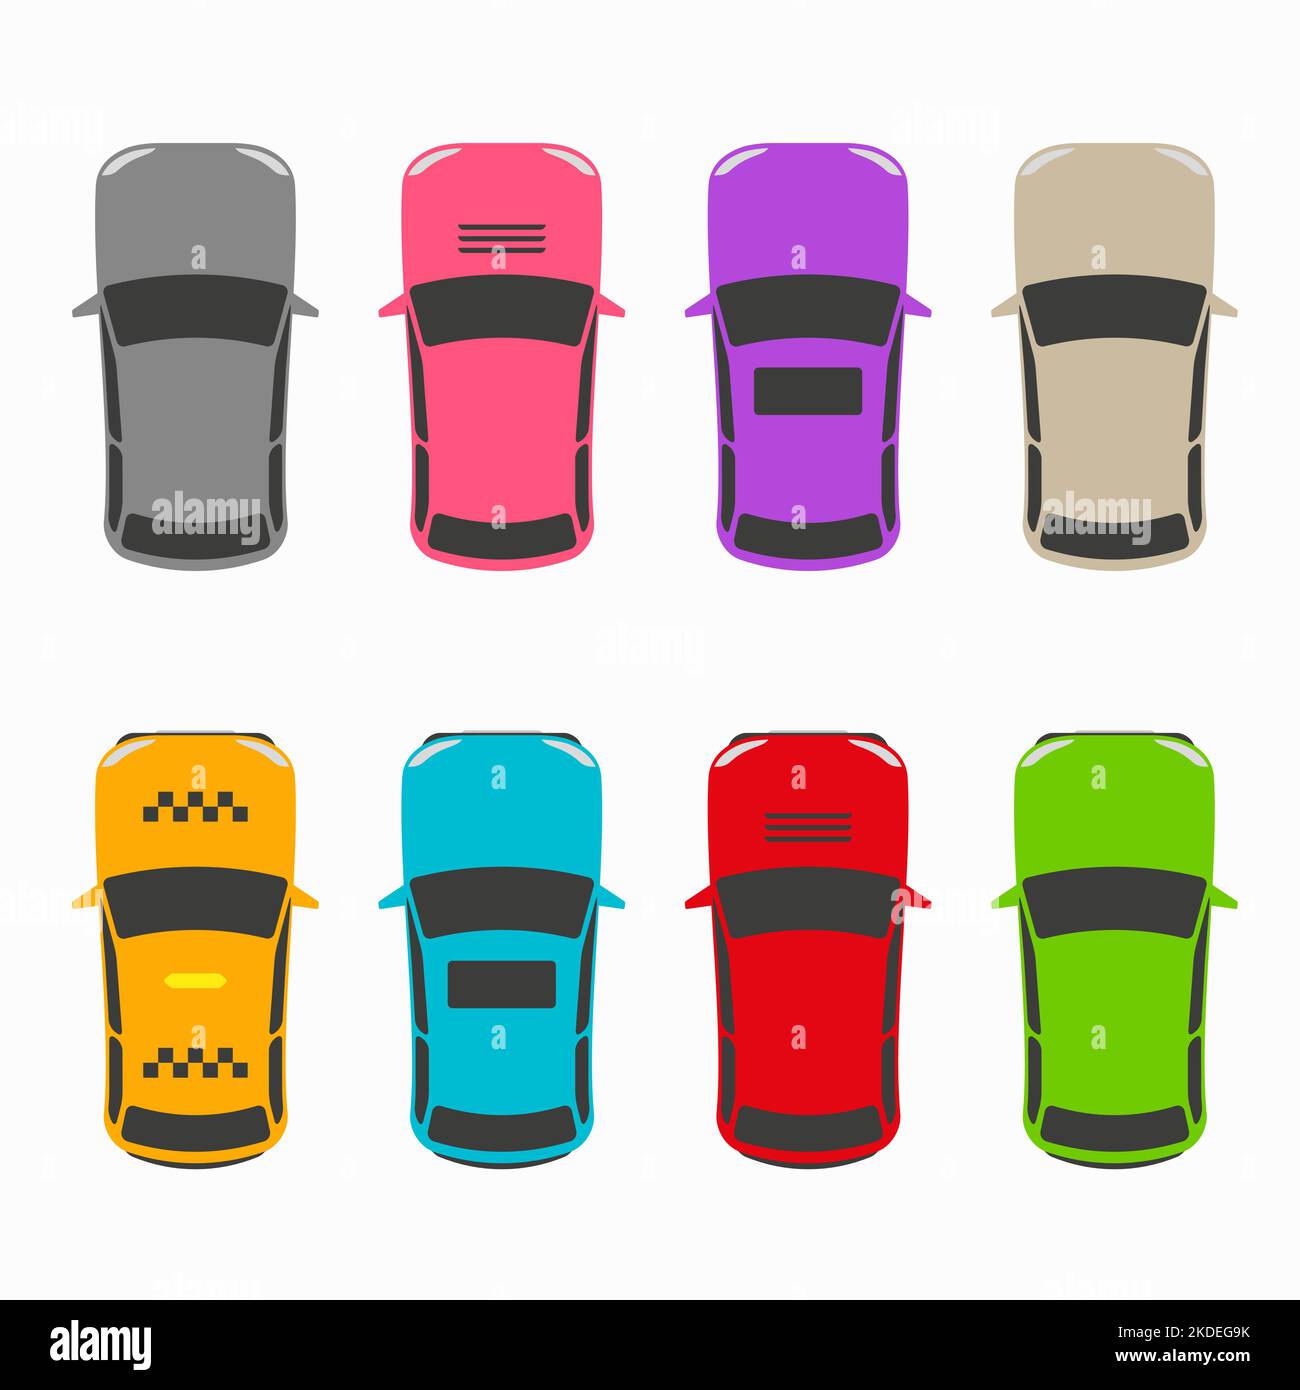 Hatchback passenger cars top view silhouette icon set. Flat vector illustration isolated on white background. Stock Vector